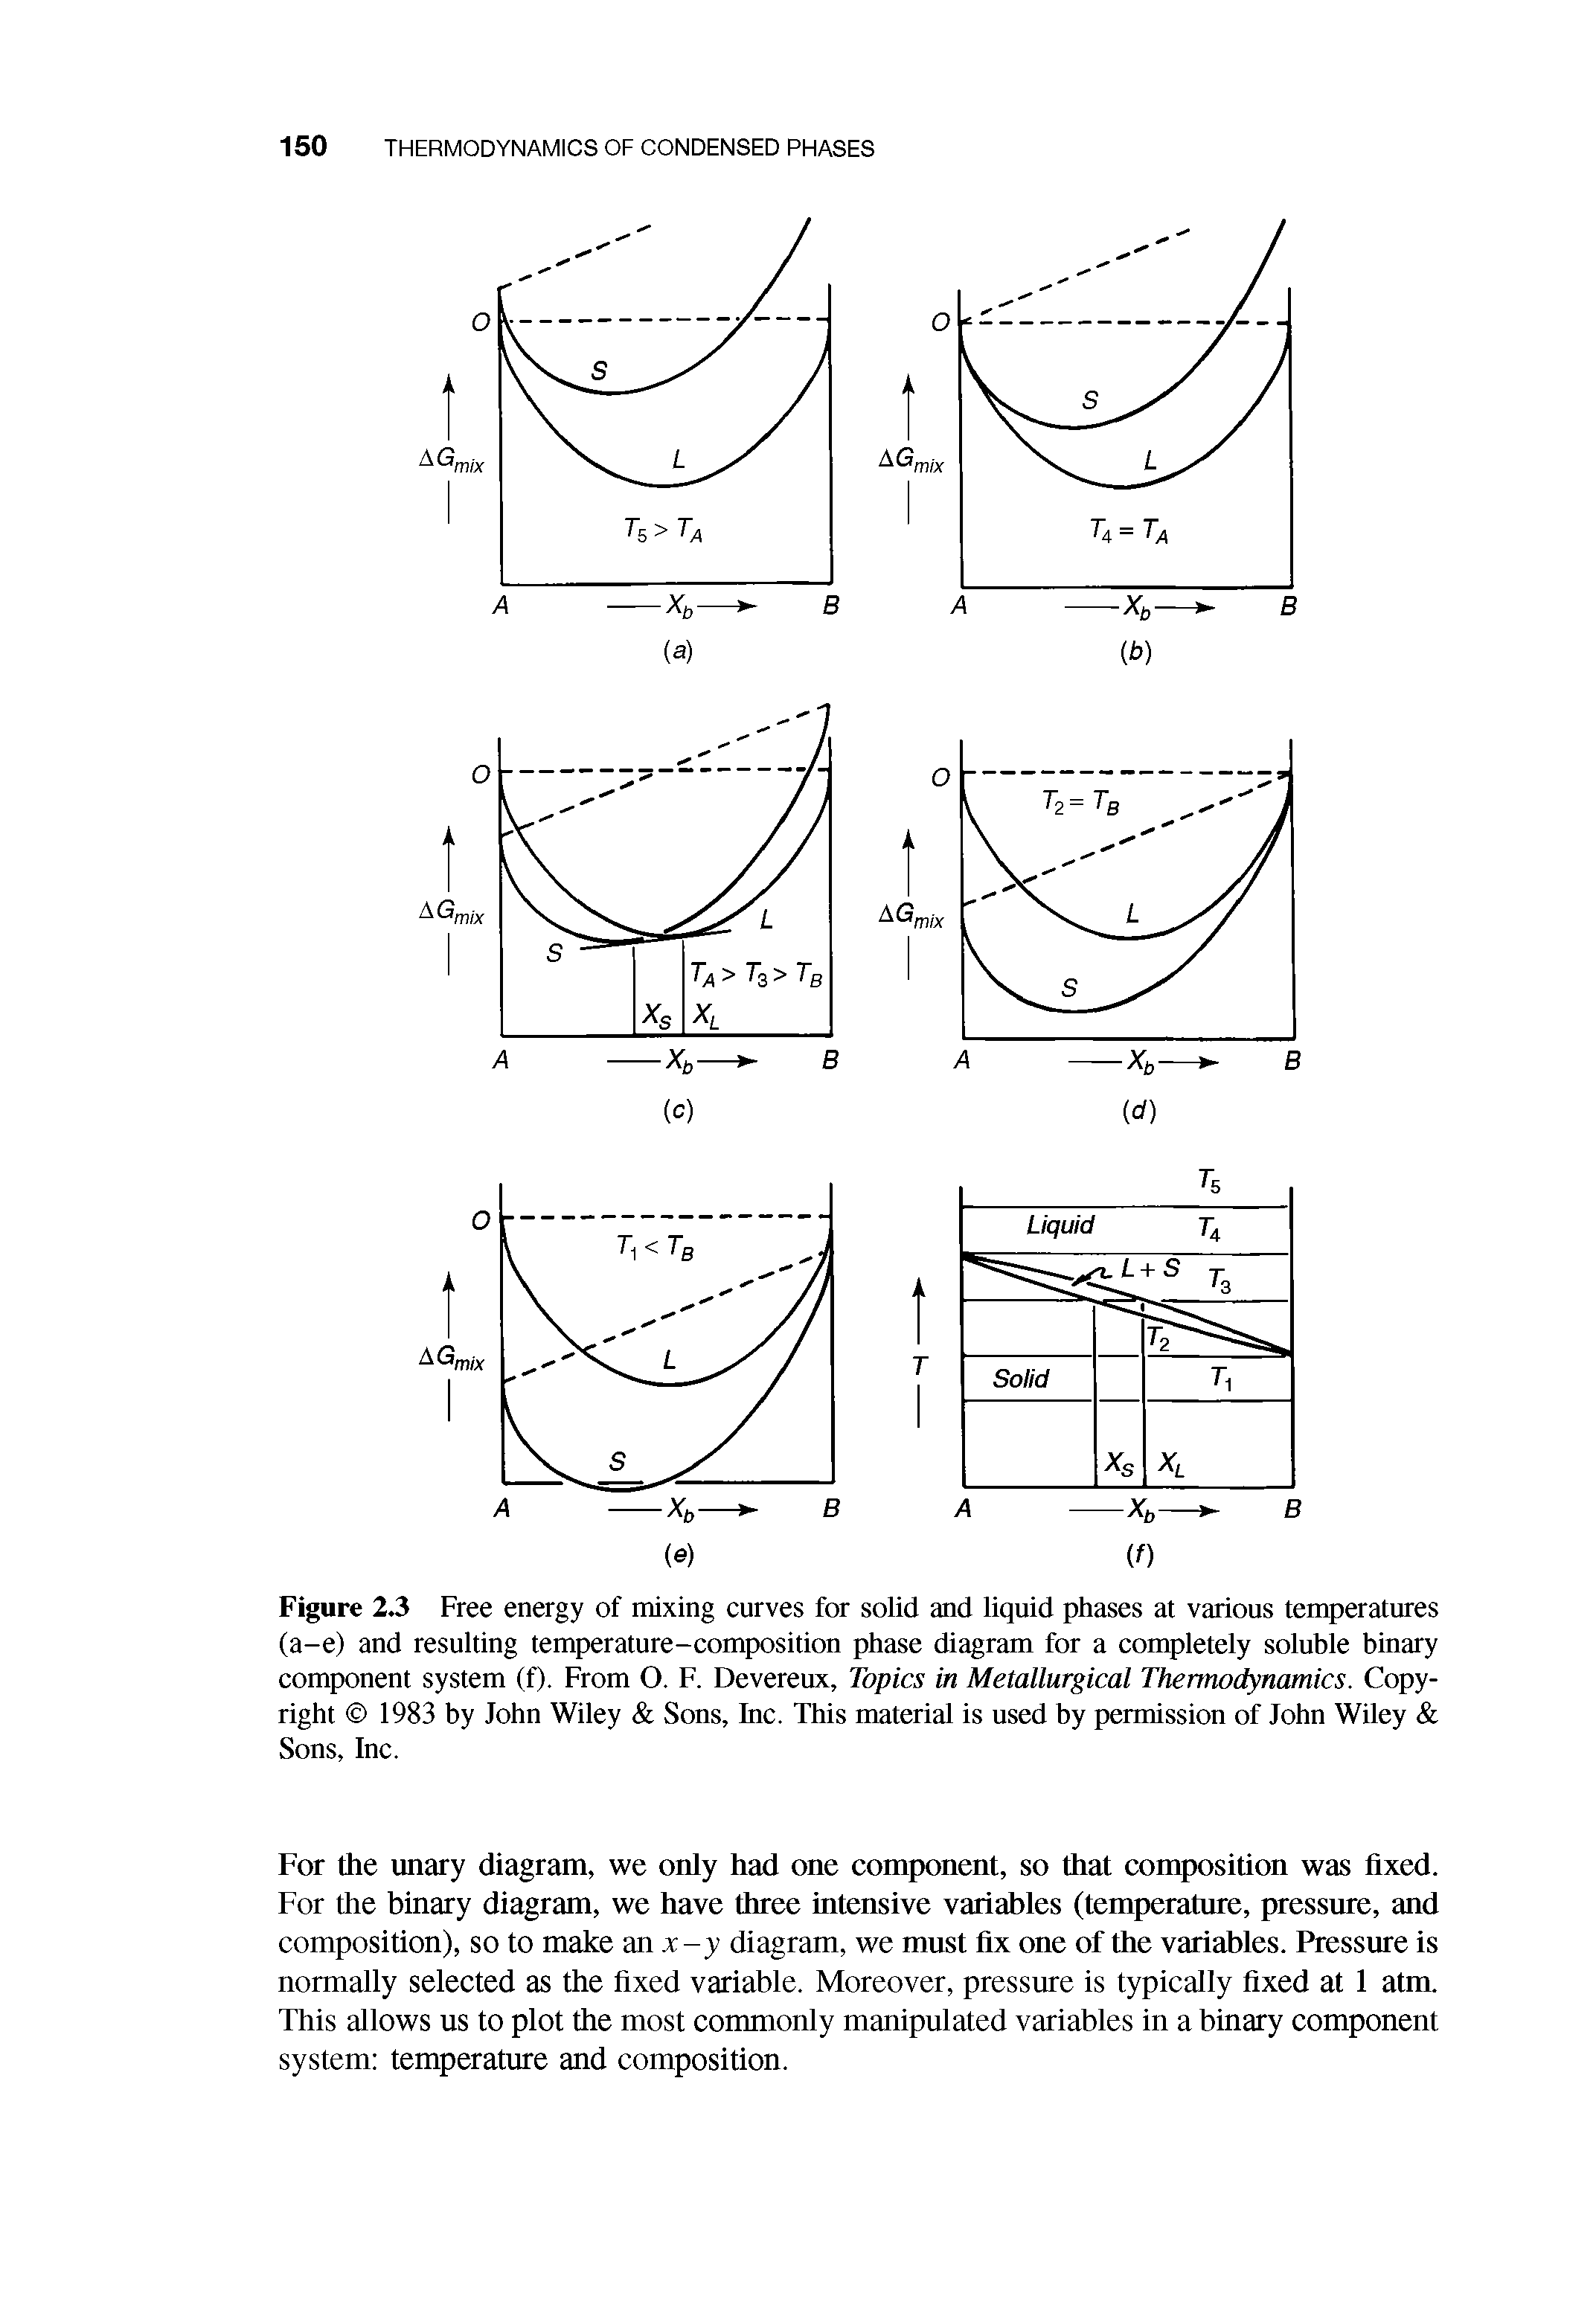 Figure 2.3 Free energy of mixing curves for solid and liquid phases at various temperatures (a-e) and resulting temperature-composition phase diagram for a completely soluble binary component system (f). From O. F. Devereux, Topics in Metallurgical Thermodynamics. Copyright 1983 by John Wiley Sons, hic. This material is used by permission of John Wiley Sons, Inc.